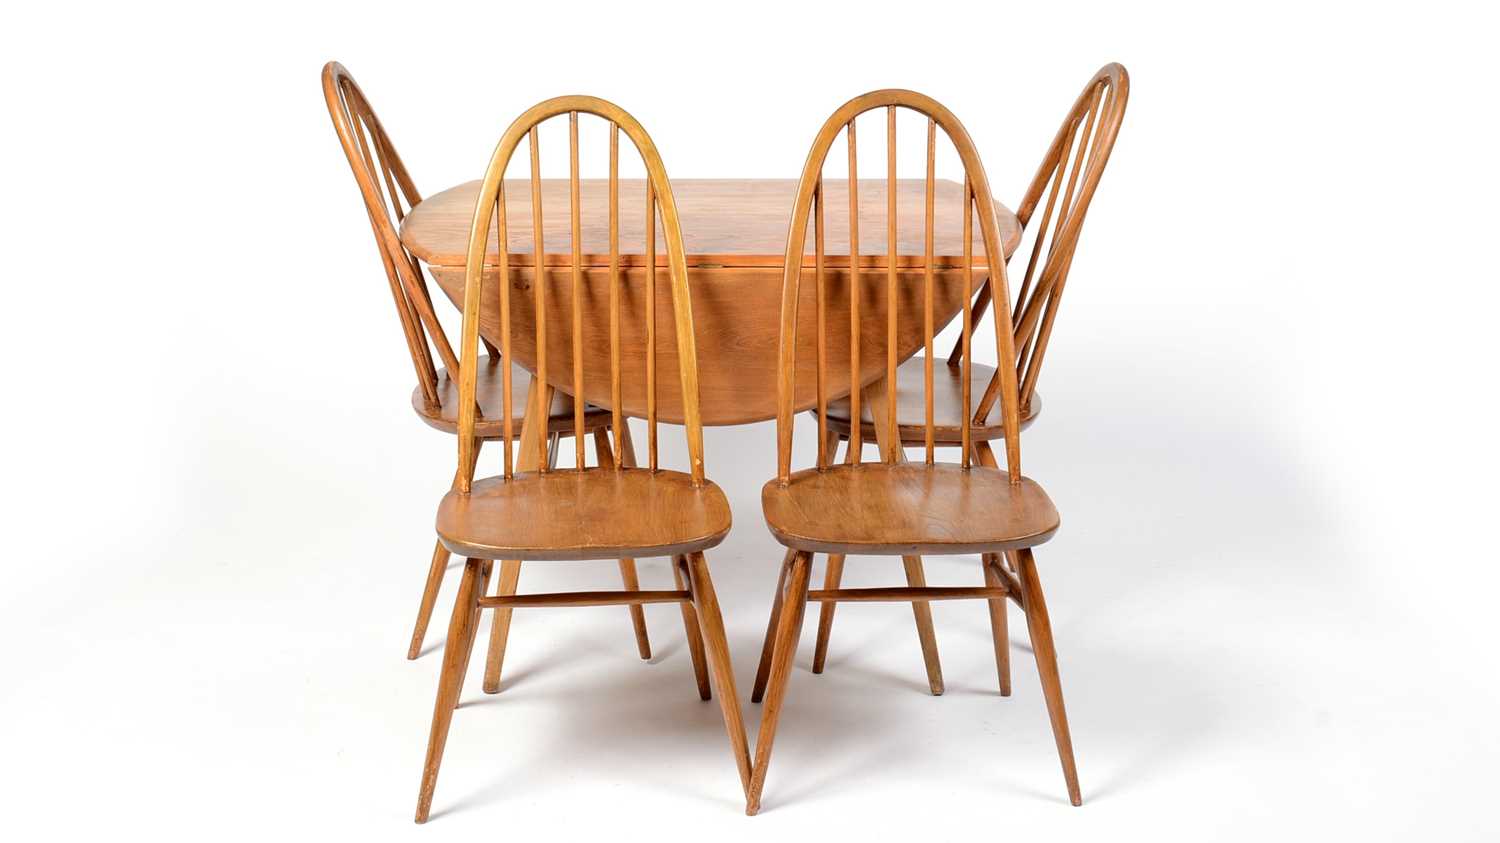 Lot 88 - Ercol - Lucien Ercolani - Quaker - A retro vintage circa 1960s beech and elm table and chairs